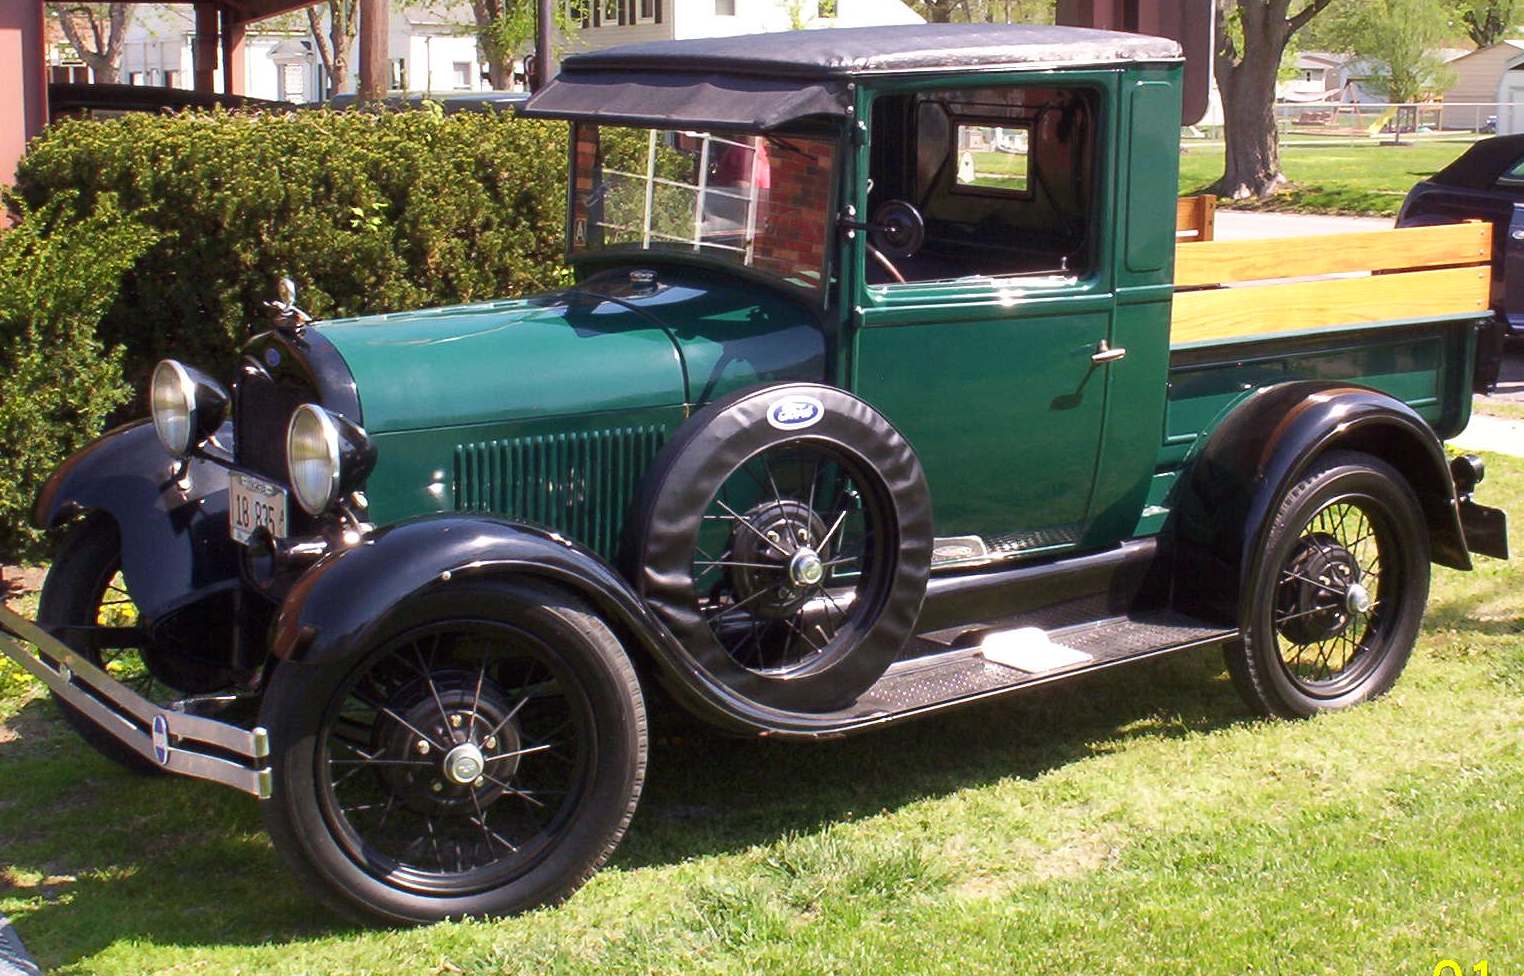 The Model A Fords: Adventures in Automotive